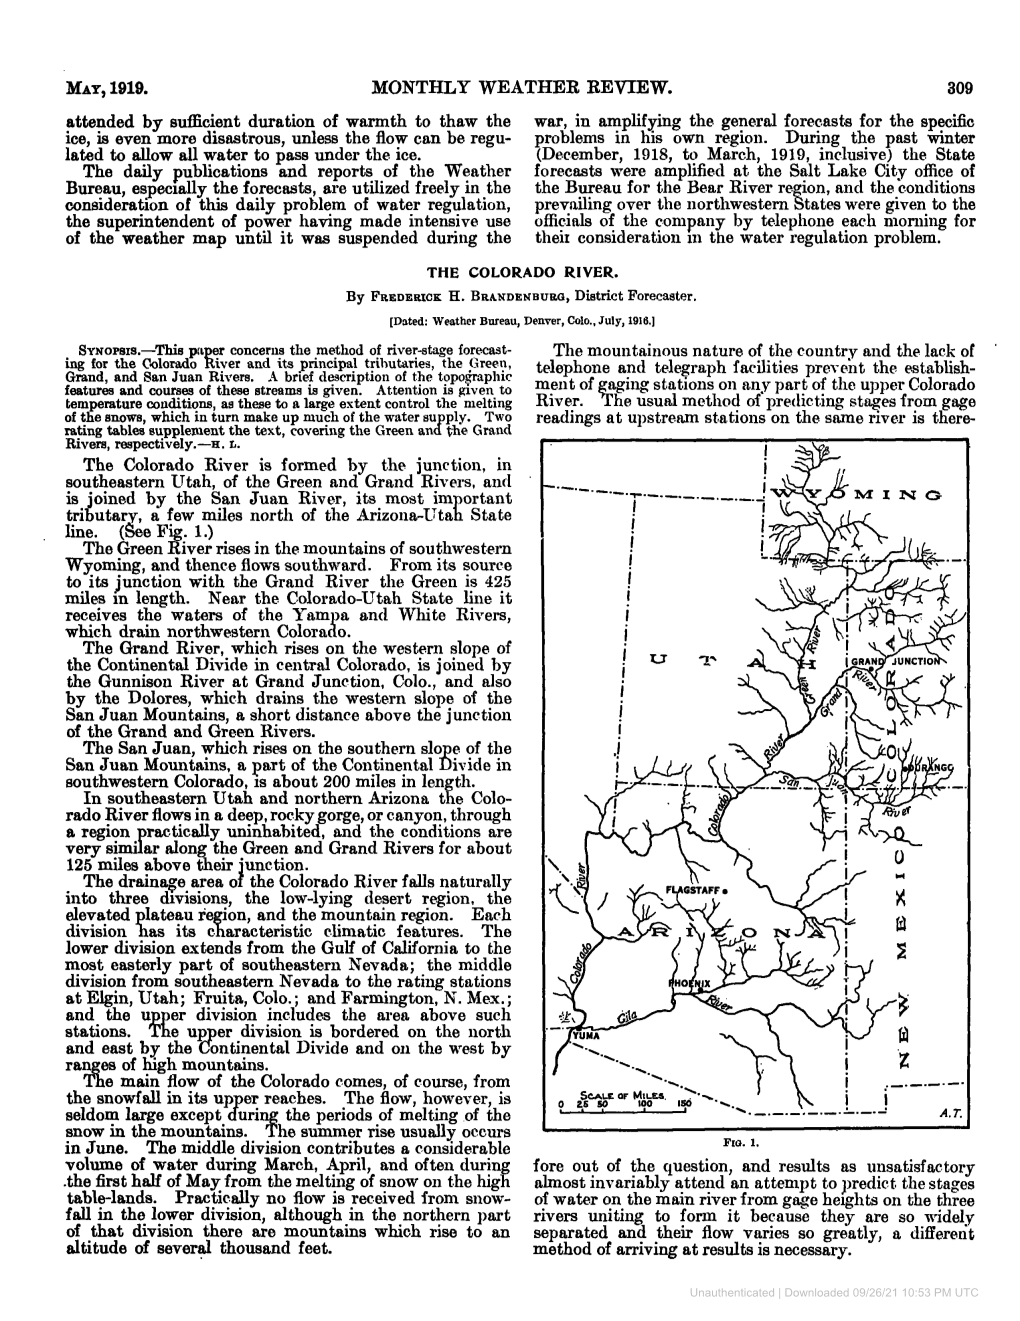 May, 1919. Monthly Weather Review